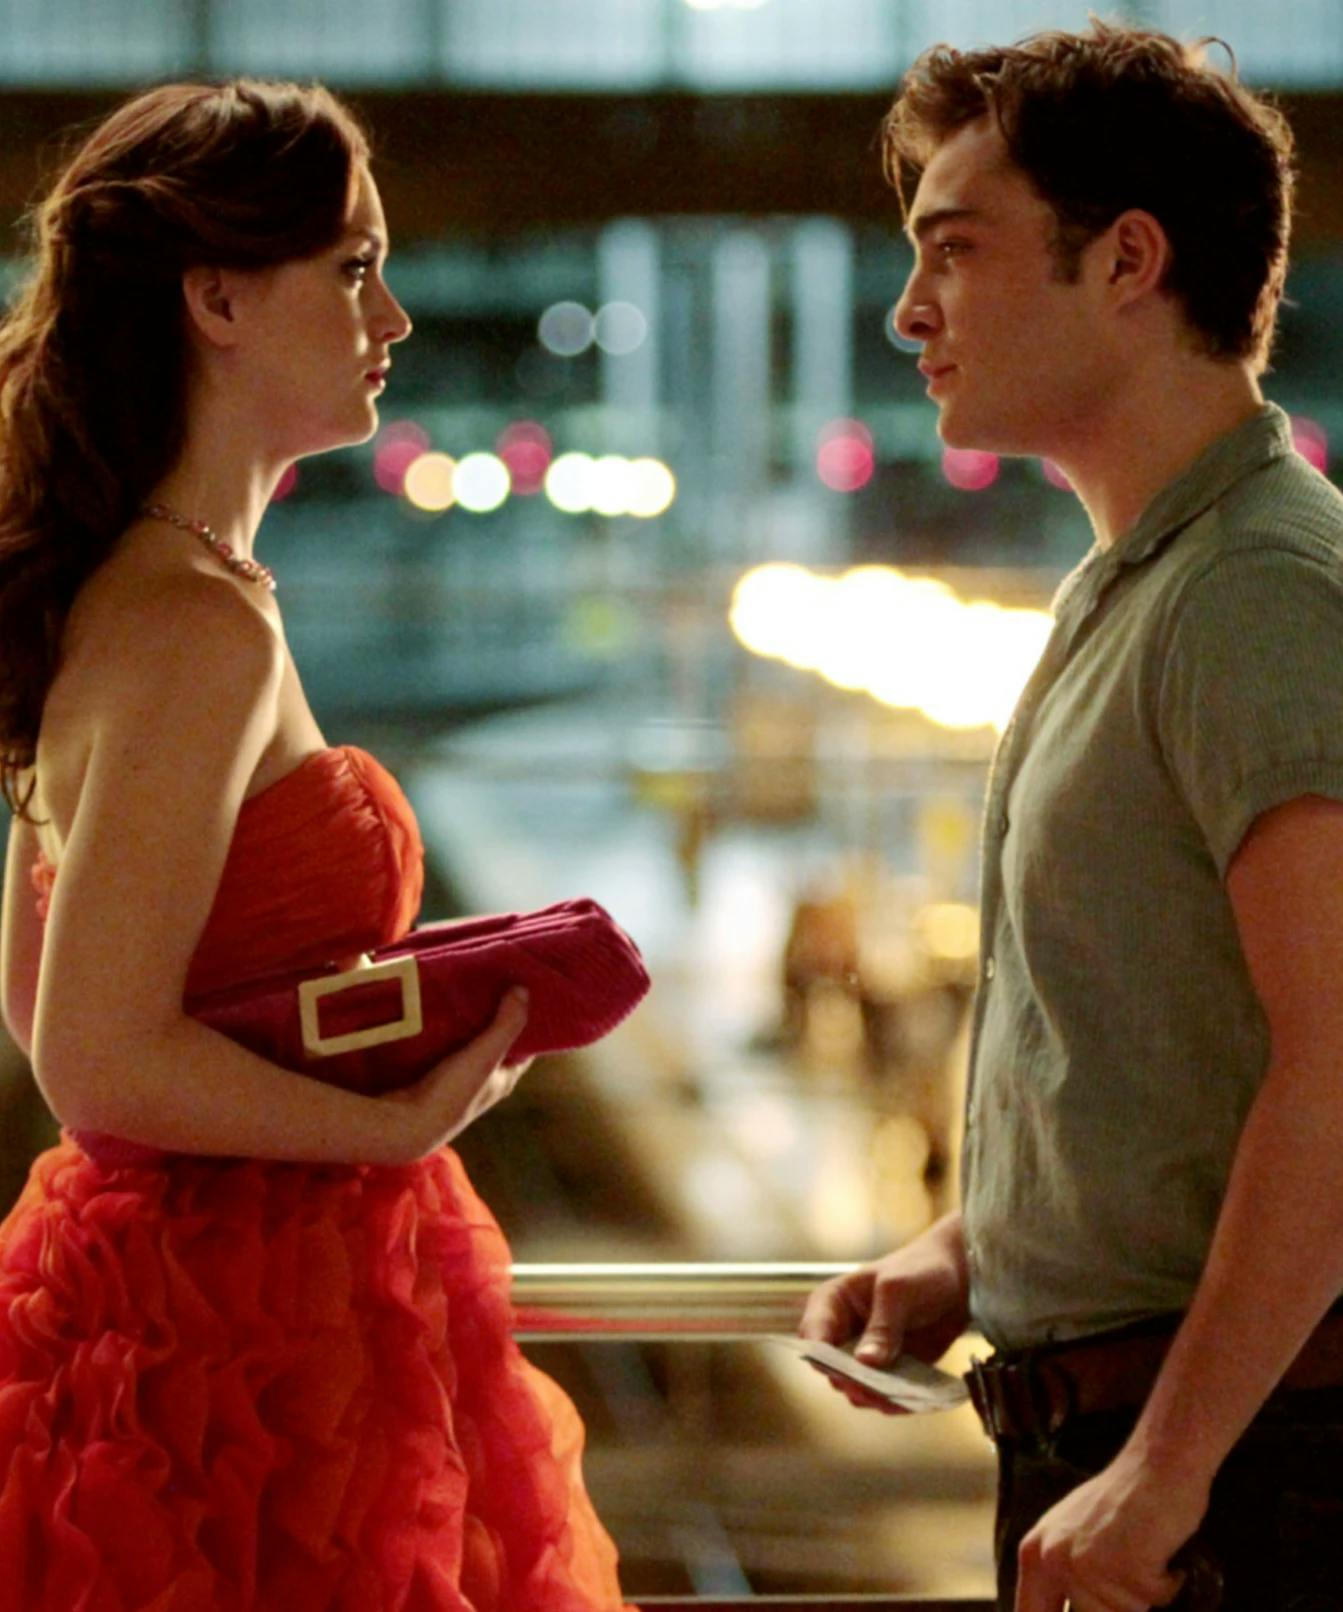 10 Of The Craziest Moments From The Original ‘Gossip Girl’ Series